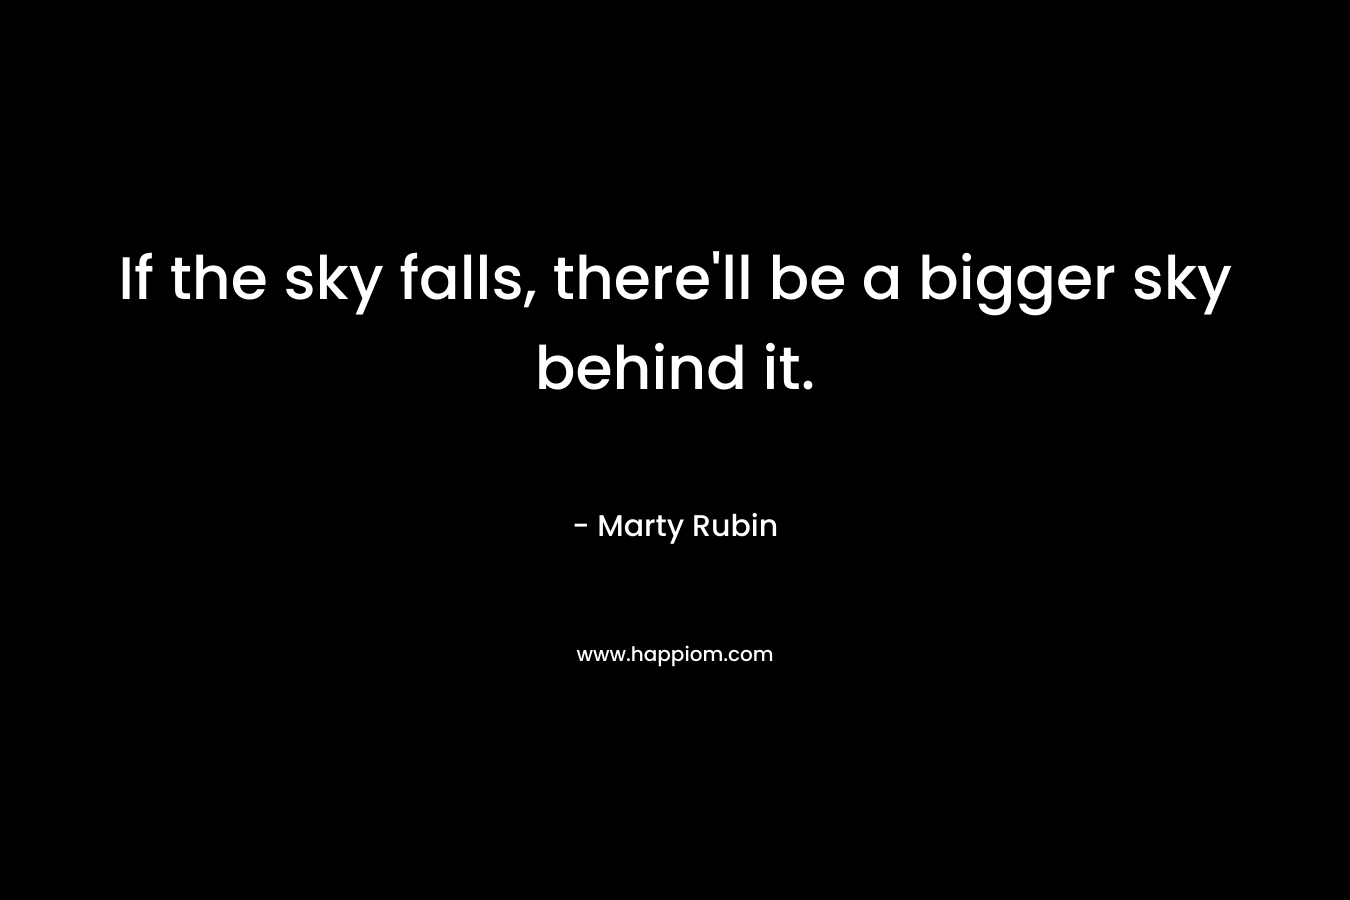 If the sky falls, there'll be a bigger sky behind it.